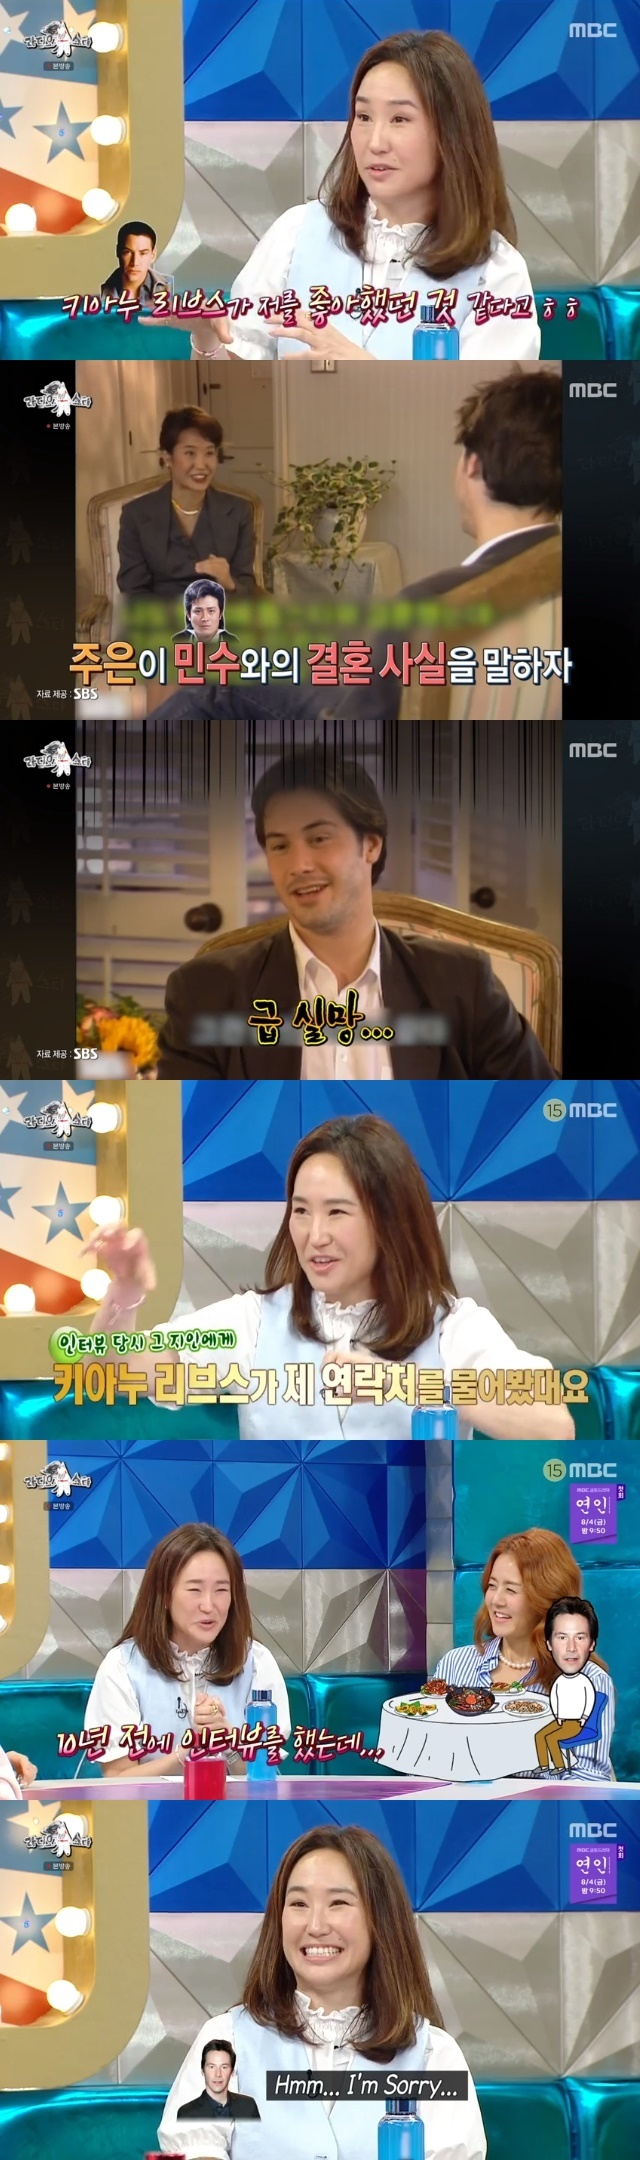 Kangju, the wife of actor Choi Min-soo, told her story of being fluttered by Hallyu star Keanu Michael Reeves when she was already married.Kangju, Hand one, Fabien, and Hani appeared as guests on the 826th episode of MBC entertainment show Radio Star (hereinafter referred to as Radio Star), which aired on July 19.Kangju said he had been flooded by Hollywood stars after marriage.It was Memory when I went to L.A. to interview Keanu Michael Reeves on SBS Midnight TV Entertainment when there were not many people who are fluent in English speaking like now.Kangju said, It was so awkward for me to host Interview after greeting. Ive never done it before. (By the way) It was the first time that someone had just a story-telling in English after living in Korea for a year.I thought I could breathe, and it was good to tell a story-telling in English. He also approached it so much.But Husband a story-telling is right because it is a broadcast in Korea. Our Husband is a famous actor in Korea.I thought I was the only one, but all the people in the Interview place were surprised to find out that Keanu Michael Reeves seemed to like me a story-telling. Kangju said, Eight years later, when I was ticketing (airline), a story-telling person (employee) saw his acquaintance interview at the time.At that time, he (Keanu Michael Reeves) asked me to tell him where my liaison was. I told Husband a story-telling saying, I did it to find my phone number. He did not get angry.I was rather proud of it, said Husband Choi Min-soo.I came to the movie 15 years ago (2008) and my acquaintance said, Im eating with a team that Keanu Michael Reeves works with.Kangju was worried that Keanu Michael Reeves would Memory himself, then called Choi Min-soo and asked, Do you want to Memory me?He said, Of course I do not remember, he said.Kangju said that he was introduced to the manager and went into the dining room. The people who were all a story-telling stopped and became quiet when I came in. I was so embarrassed that I could not stop. I walked in and went to Keanu and said, Hello.I interviewed your movie 10 years ago and said, Can you remember me?I finished my embarrassing experience saying, Yes, then go to Seoul and go back. Gim Gu-ra, who was lamenting, said, Kangju is great and Choi Min-soo is trying to make a fool of himself. I laughed.On the other hand, Kangju also mentioned the travels that Choi Min-soo recently committed.When Gim Gu-ra said, I saw him lying down at the production presentation, Kangju said, I was not surprised when I heard it, but he said, Husband does something like that.Asked what Choi Min-soos first trip to Memory was, Kangju said, There were a lot of strange behaviors. There were so many, but it started in Canada for the first time.I did not answer, but I showed up in Canada. I came to the Bronx Zoo and took the Bronx Zoo because I was going to the Bronx Zoo.We were holding hands, and all of a sudden, Husband said, Wow, aaaah! In a louder, weirder voice. I was so startled that I stopped. There were elementary school children in a school. They all looked at Husband without seeing Tiger.I was so embarrassed that I asked him what he was doing. Husband is a Tiger band. He thinks he is a Tiger too.I was so surprised at the moment that I thought I should not go to the Bronx Zoo again. Kangju said, I went over this way, but Husband actually has a lot of embarrassing moments in front of nature. When I came to the next winter and rode a snowmobile together for a while, it seemed like I came to the same tree, the same place.Husband was embarrassed. It was 25 degrees below zero. I took off my jacket and sat in the back (embarrassed) when I was in front of nature and said, I know what happens when I get angry. Kangju, however, asked why he decided to marry Choi Min-soo and said, This challenge has come to me.Even until that day when I was married, I even saw this man and confessed, I was too late to tell a story-telling that I would not get married here.